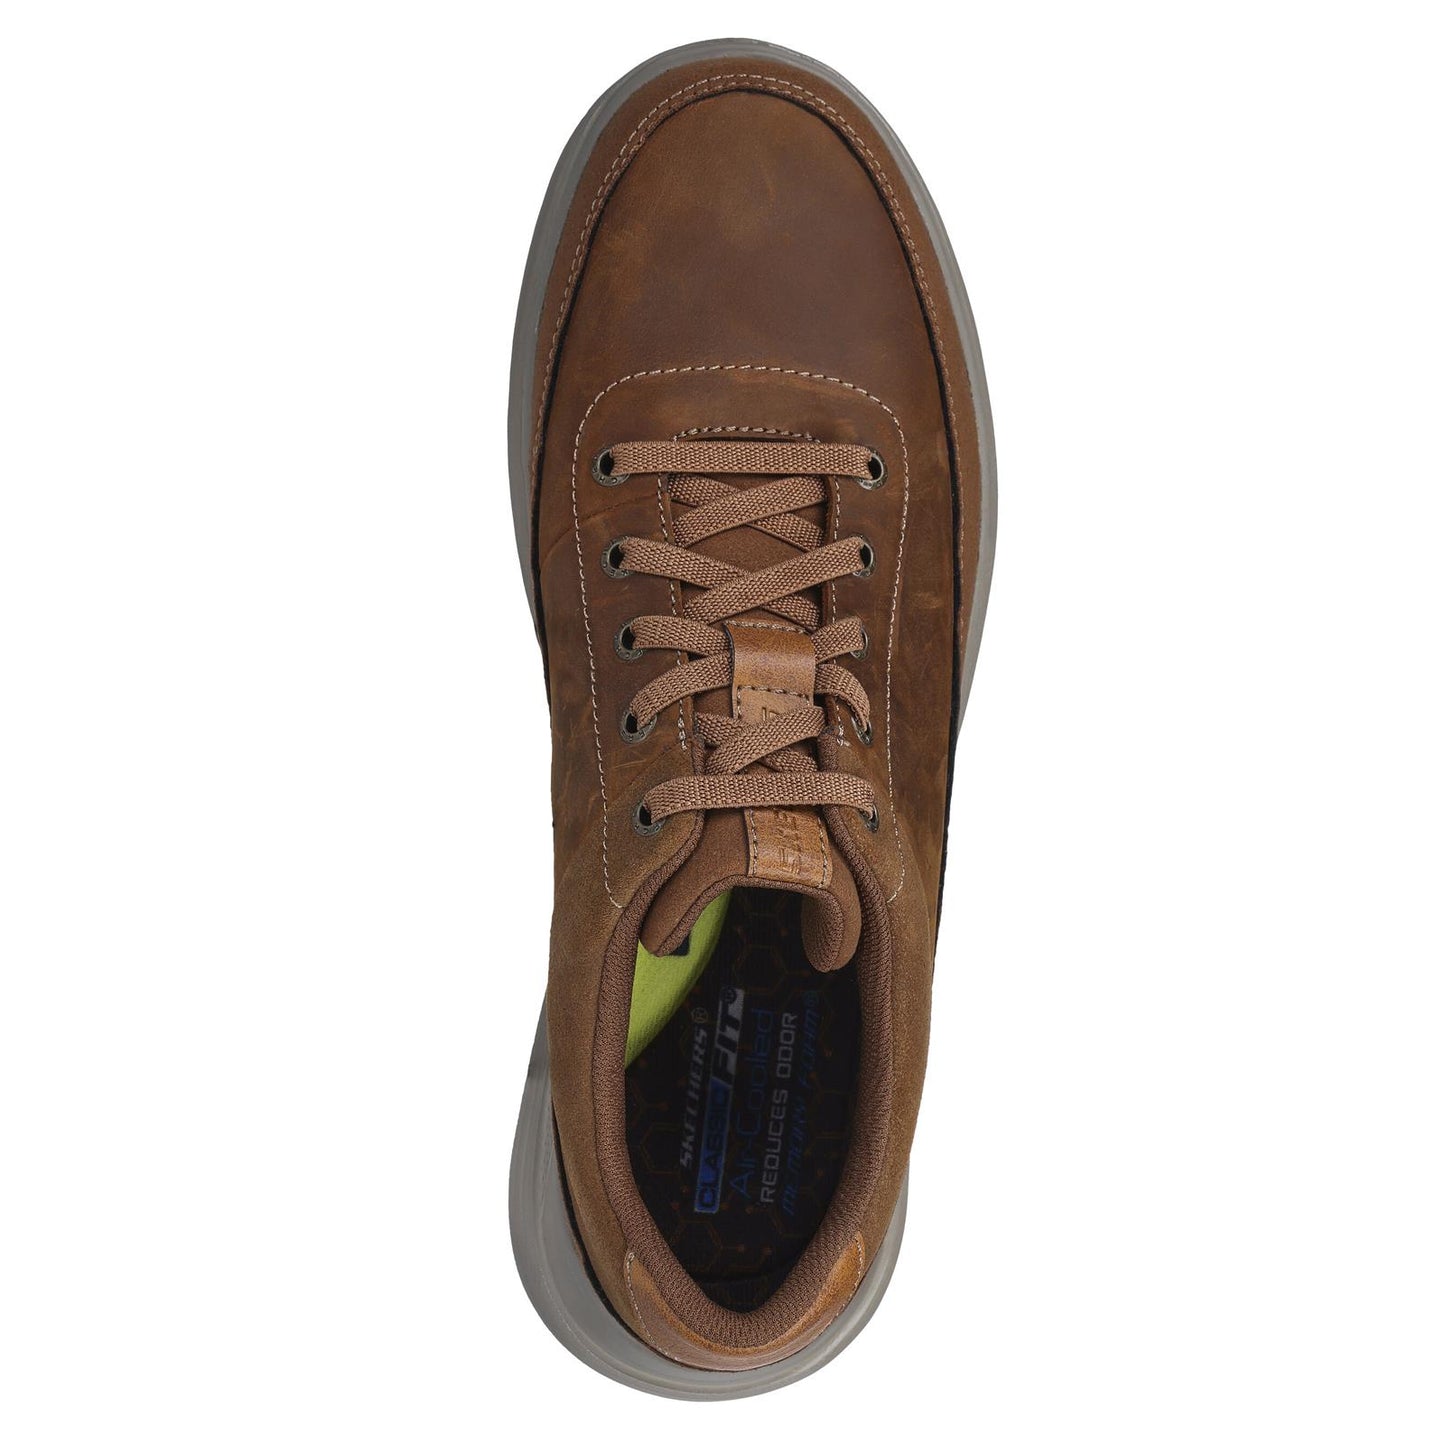 Skechers Mens Proven Aldeno Dark Brown Casual Lace Up Shoes